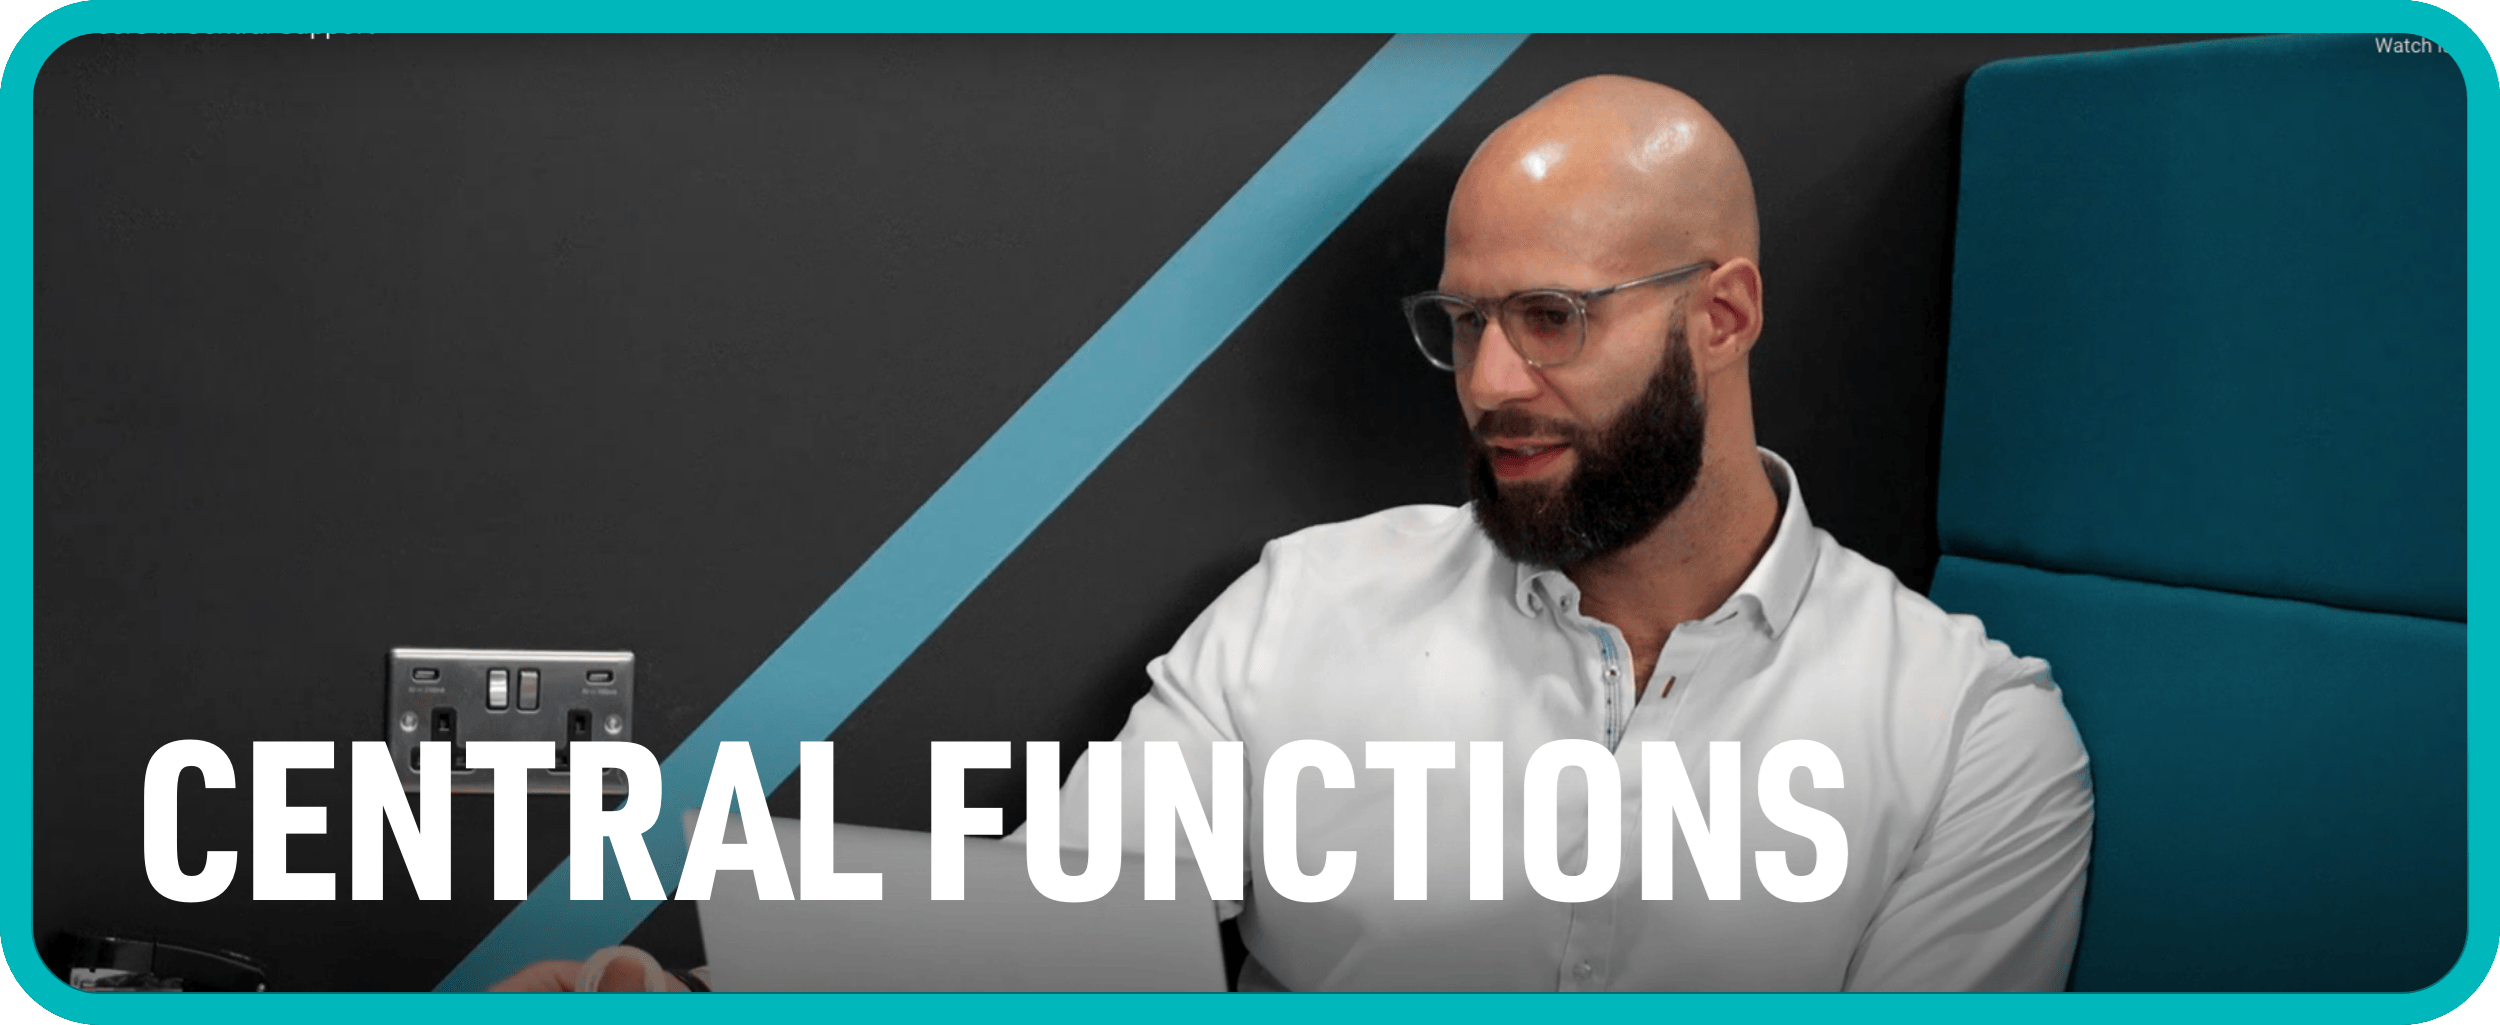 Central functions